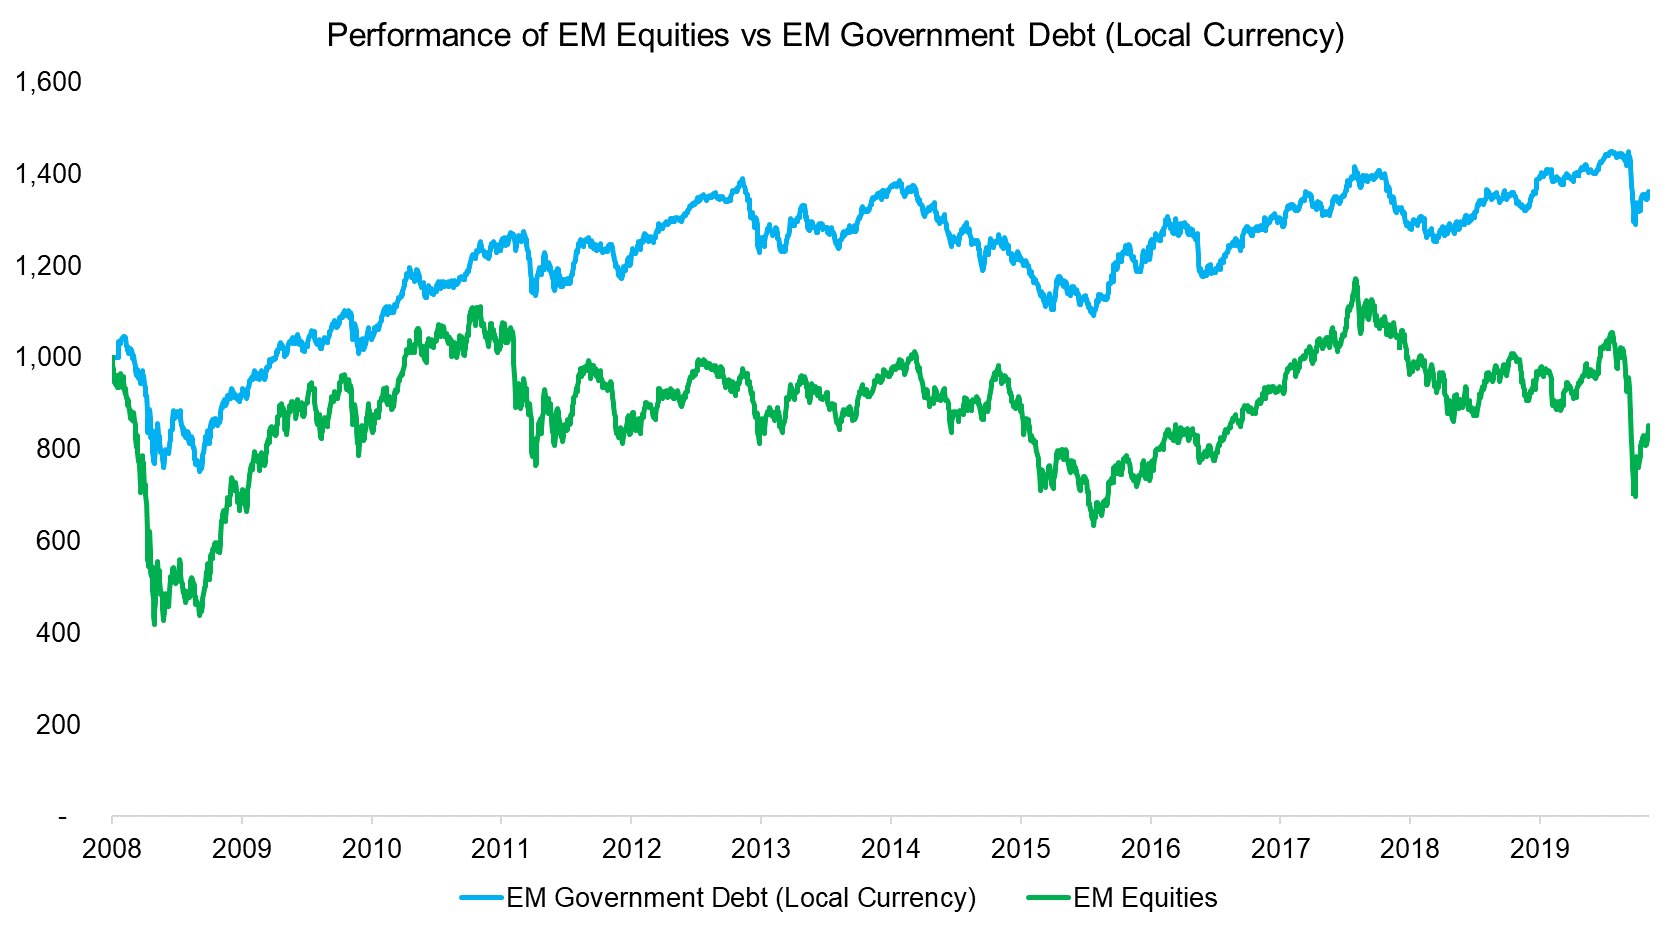 Performance of EM Equities vs EM Government Debt (Local Currency)